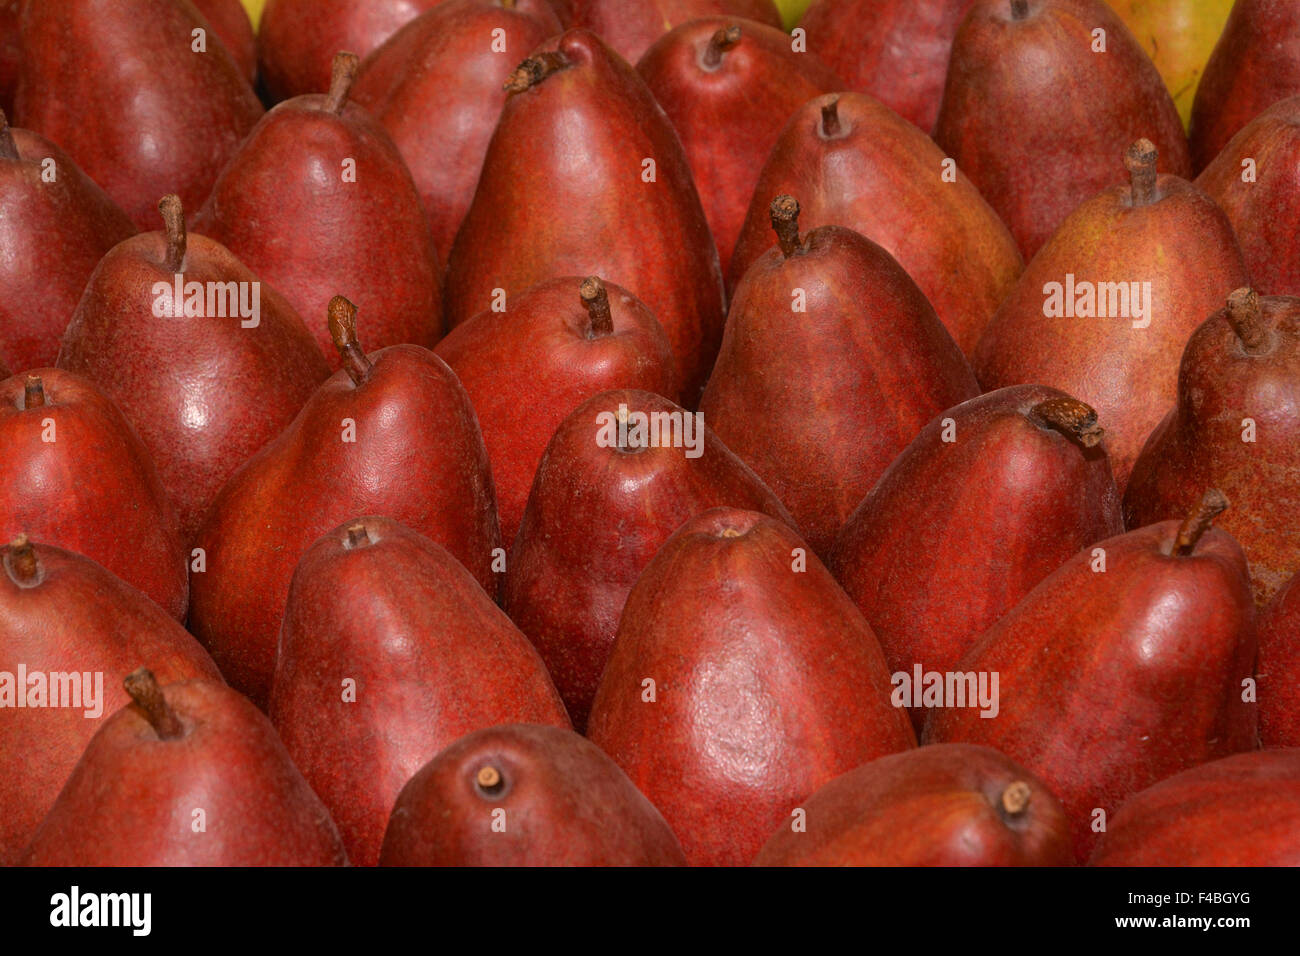 Red pears Stock Photo